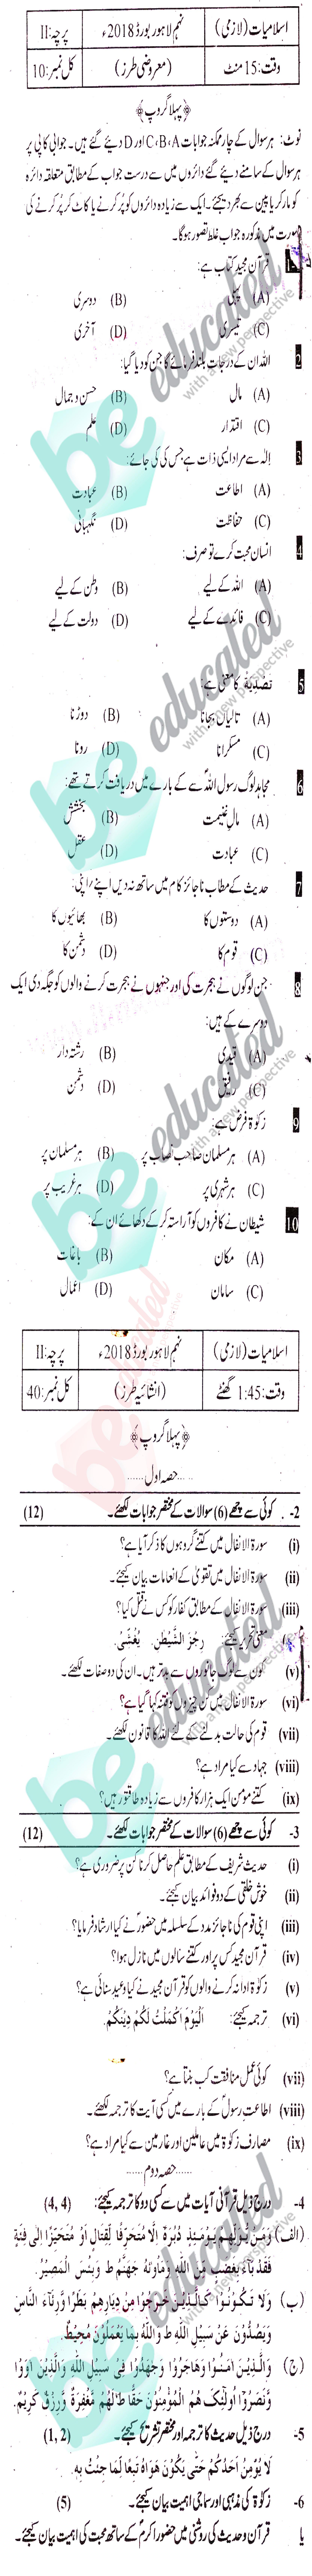 Islamiat (Compulsory) 9th class Past Paper Group 1 BISE Lahore 2018